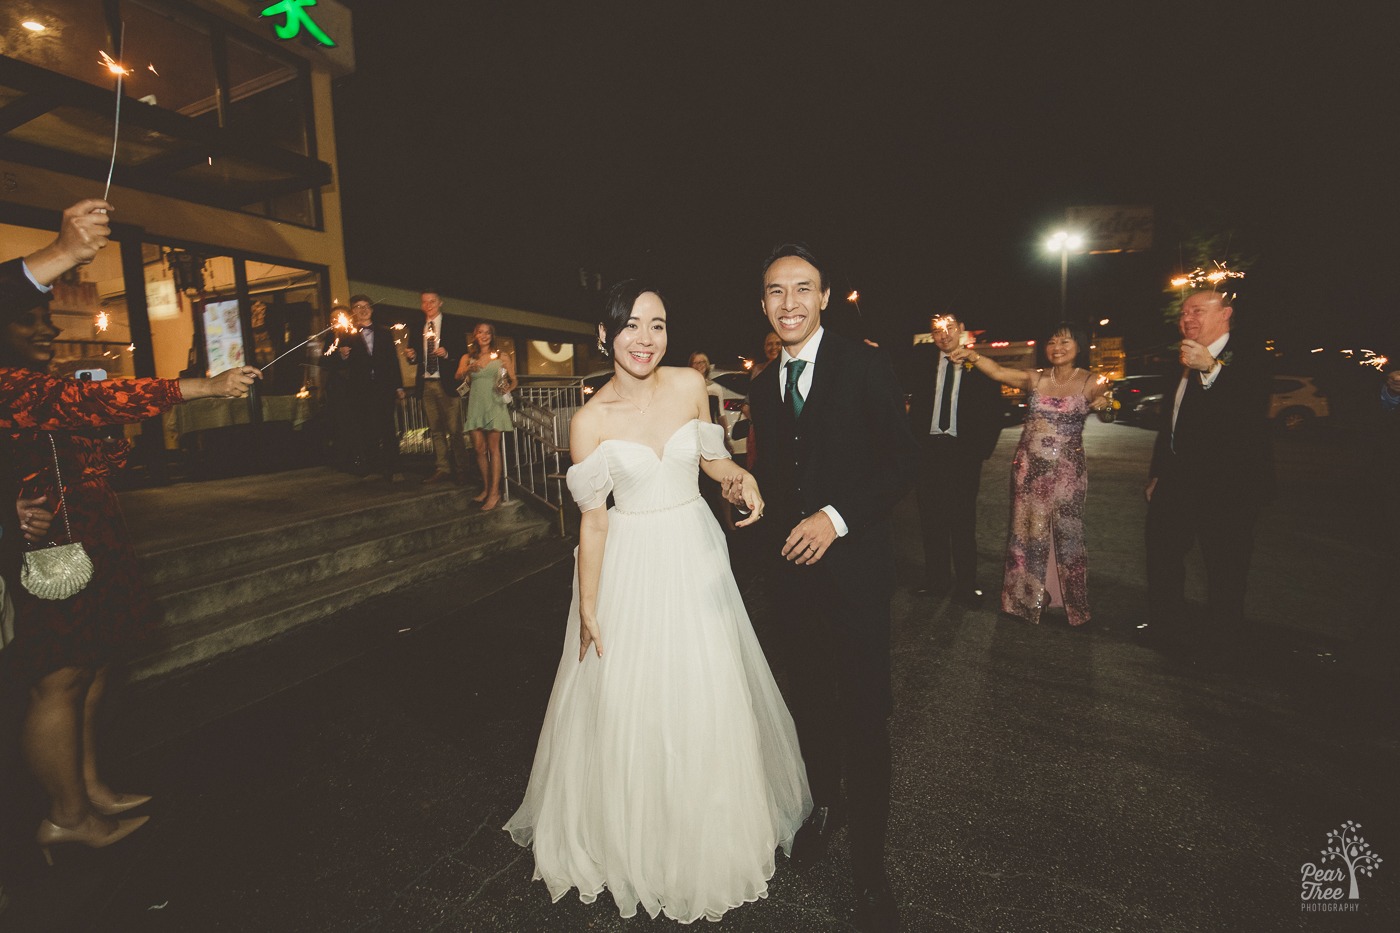 Smiling newlywed Asian couple standing in parking lot surrounded by happy family holding sparklers